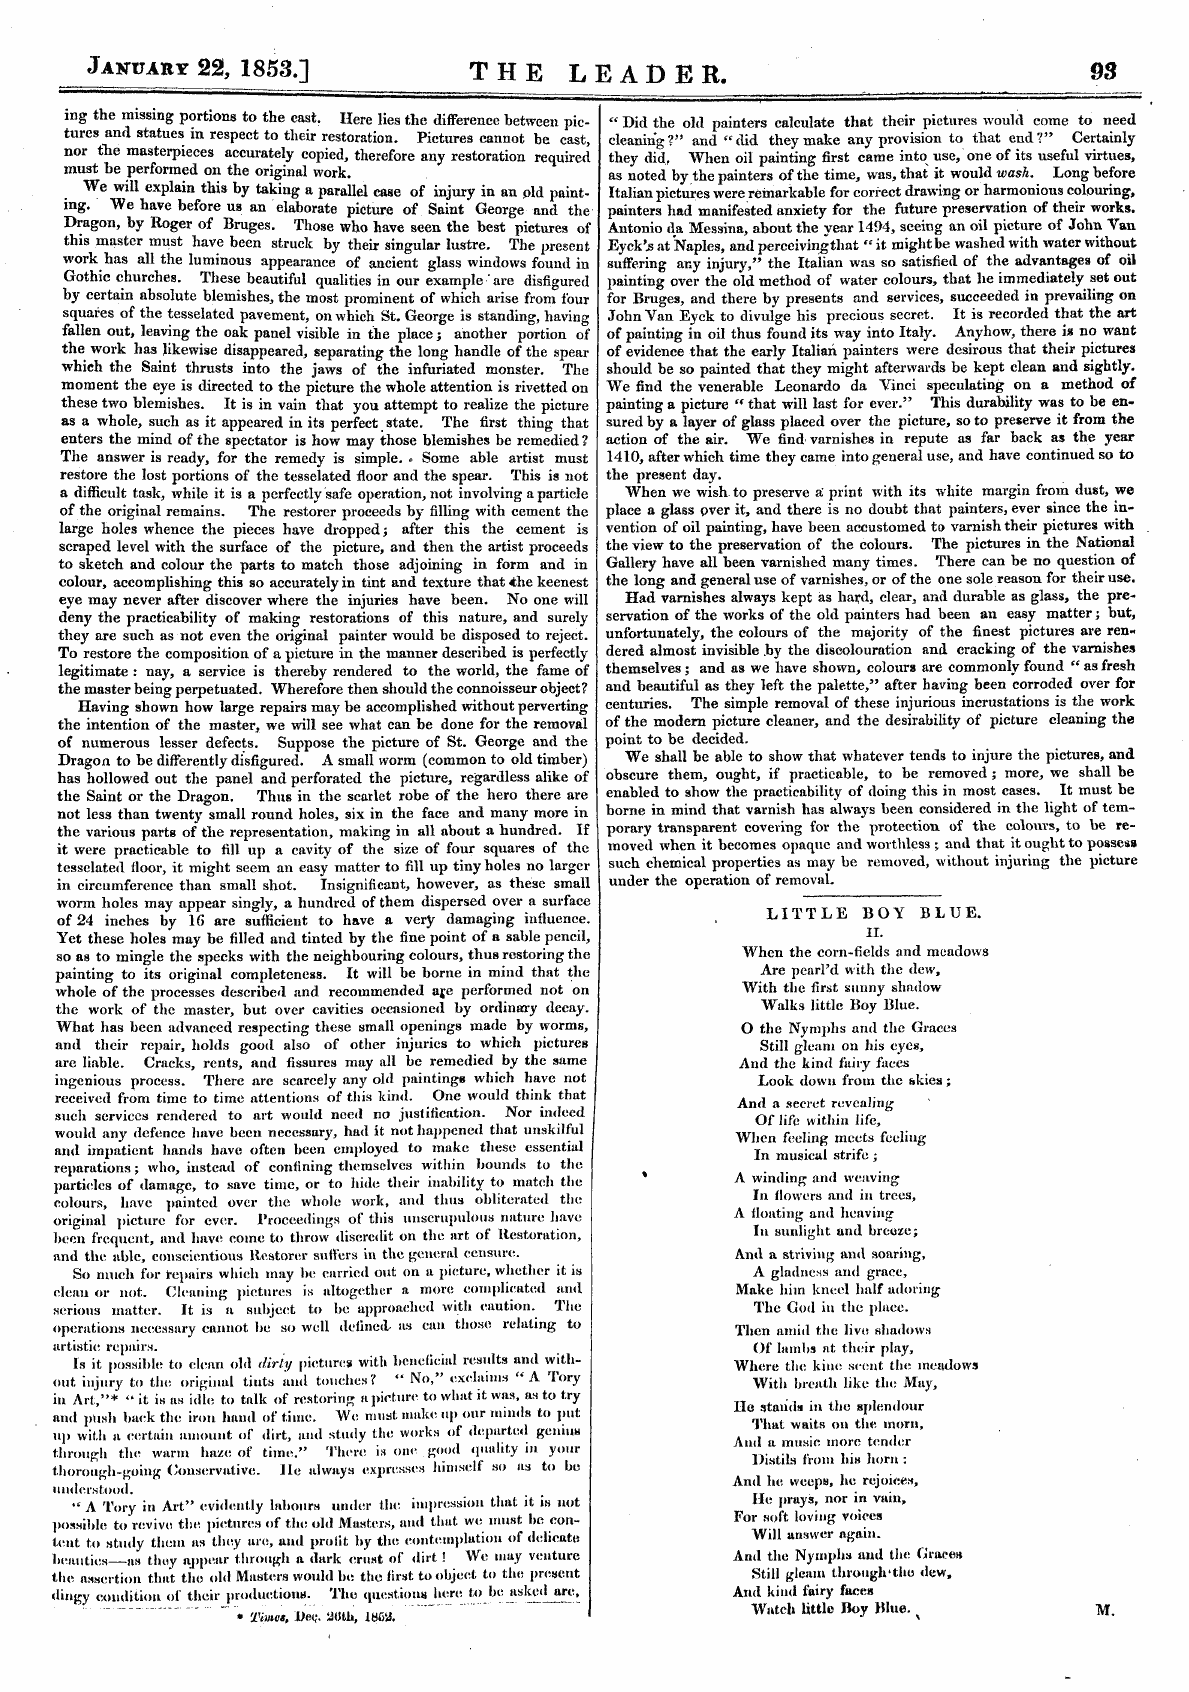 Leader (1850-1860): jS F Y, Country edition - Jakpary 22, 1853.] The Leadek. 98